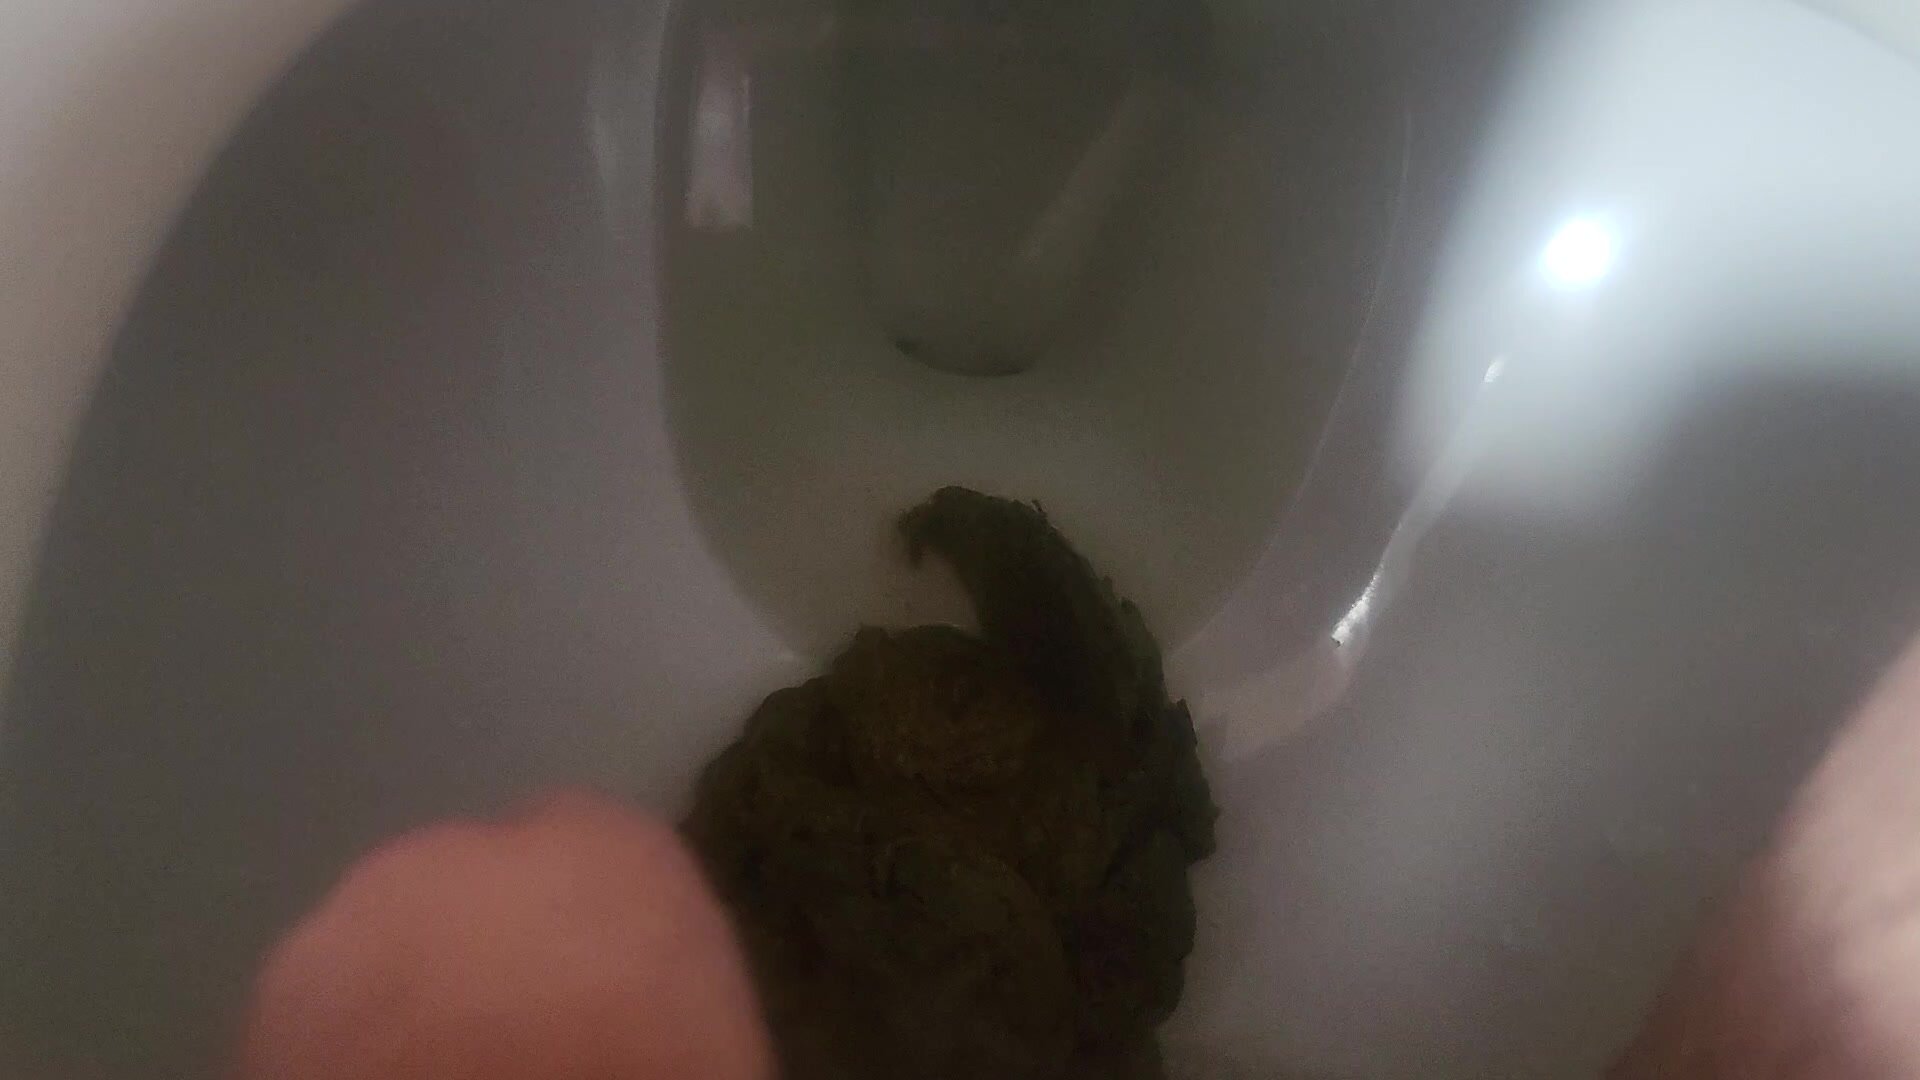 Big shit in the toilet (Inside toilet view)